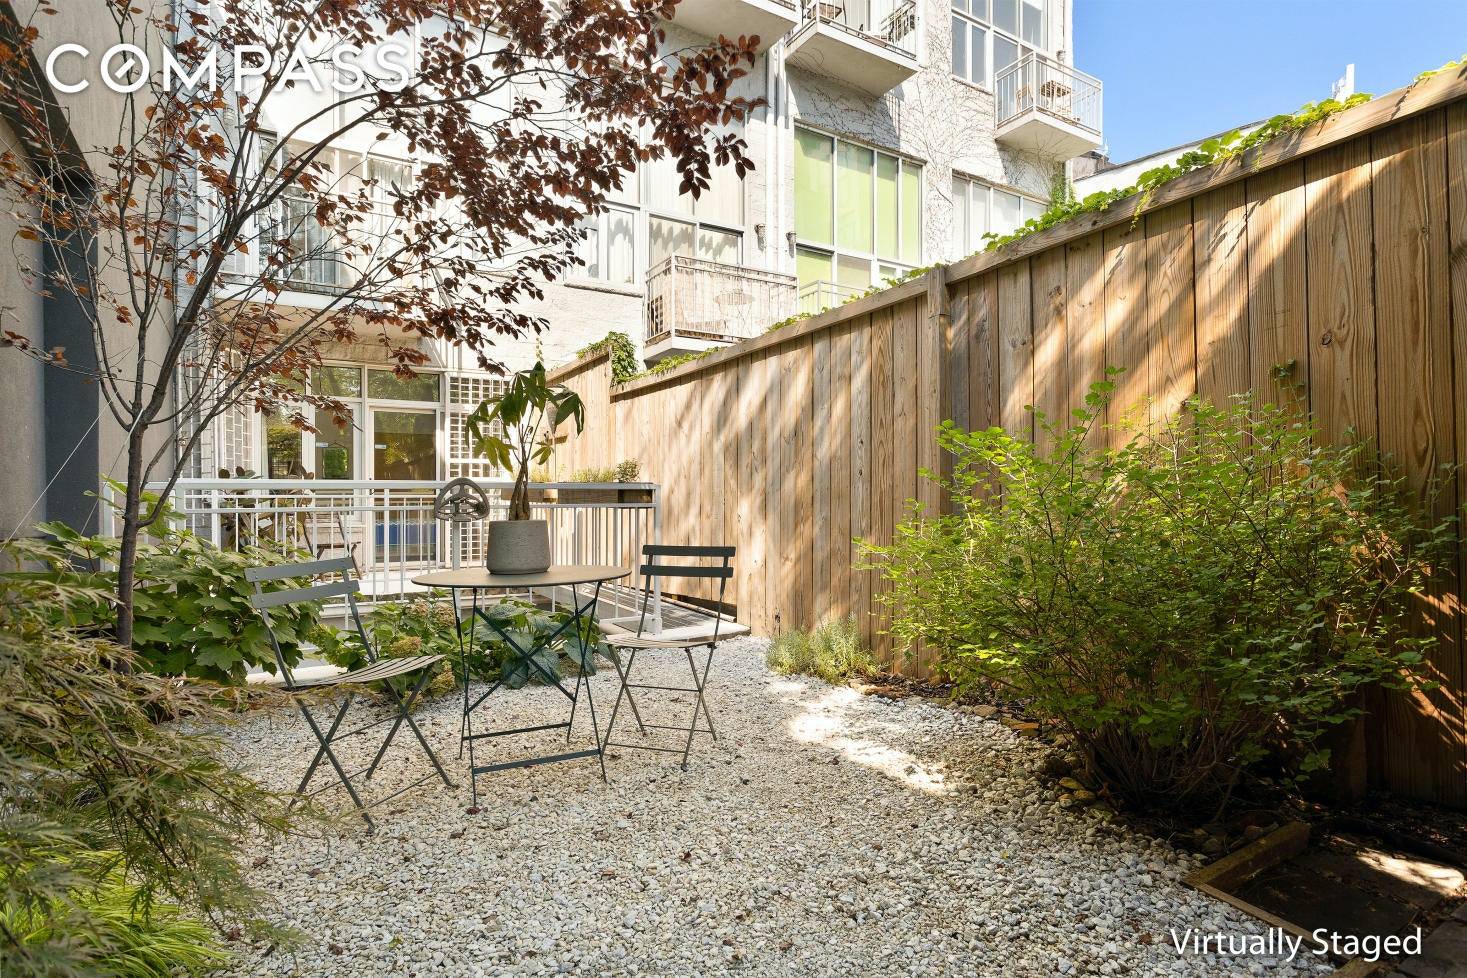 Be prepared to fall in love with a huge private garden and patio when you step into this stunning and spacious duplex residence in the heart of East Williamsburg.